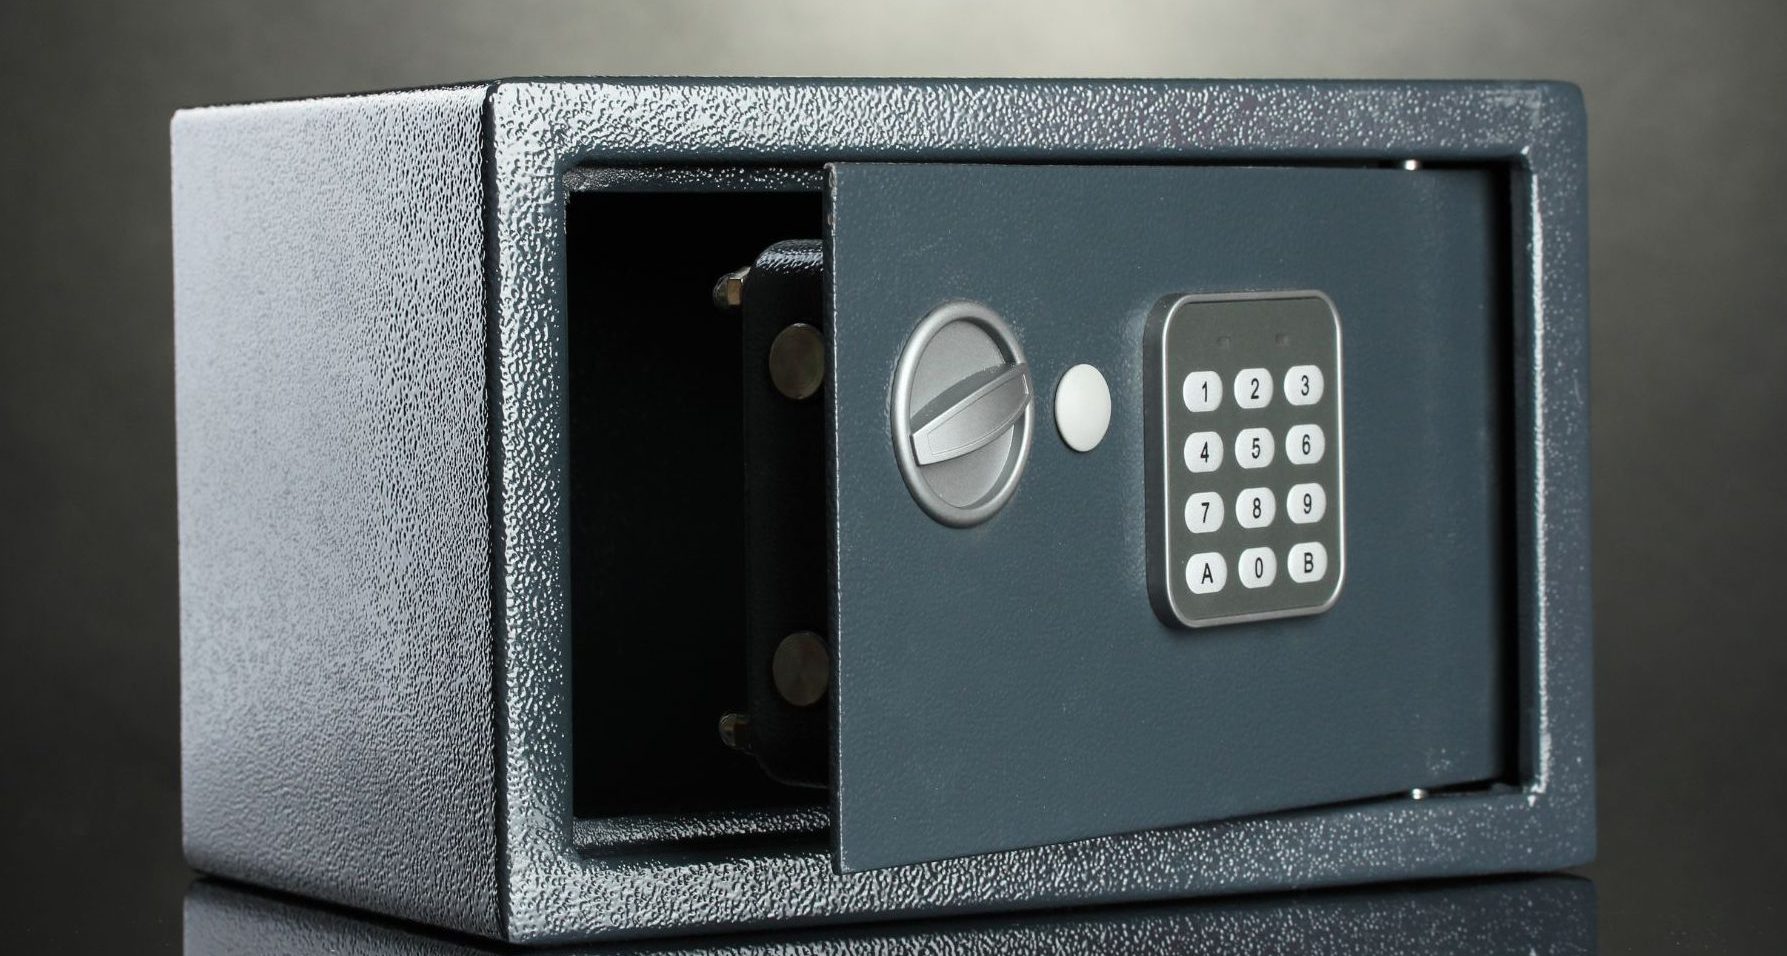 Global Safes And Vaults Market Growth Analysis And Indications – Includes Safes And Vaults Market Share